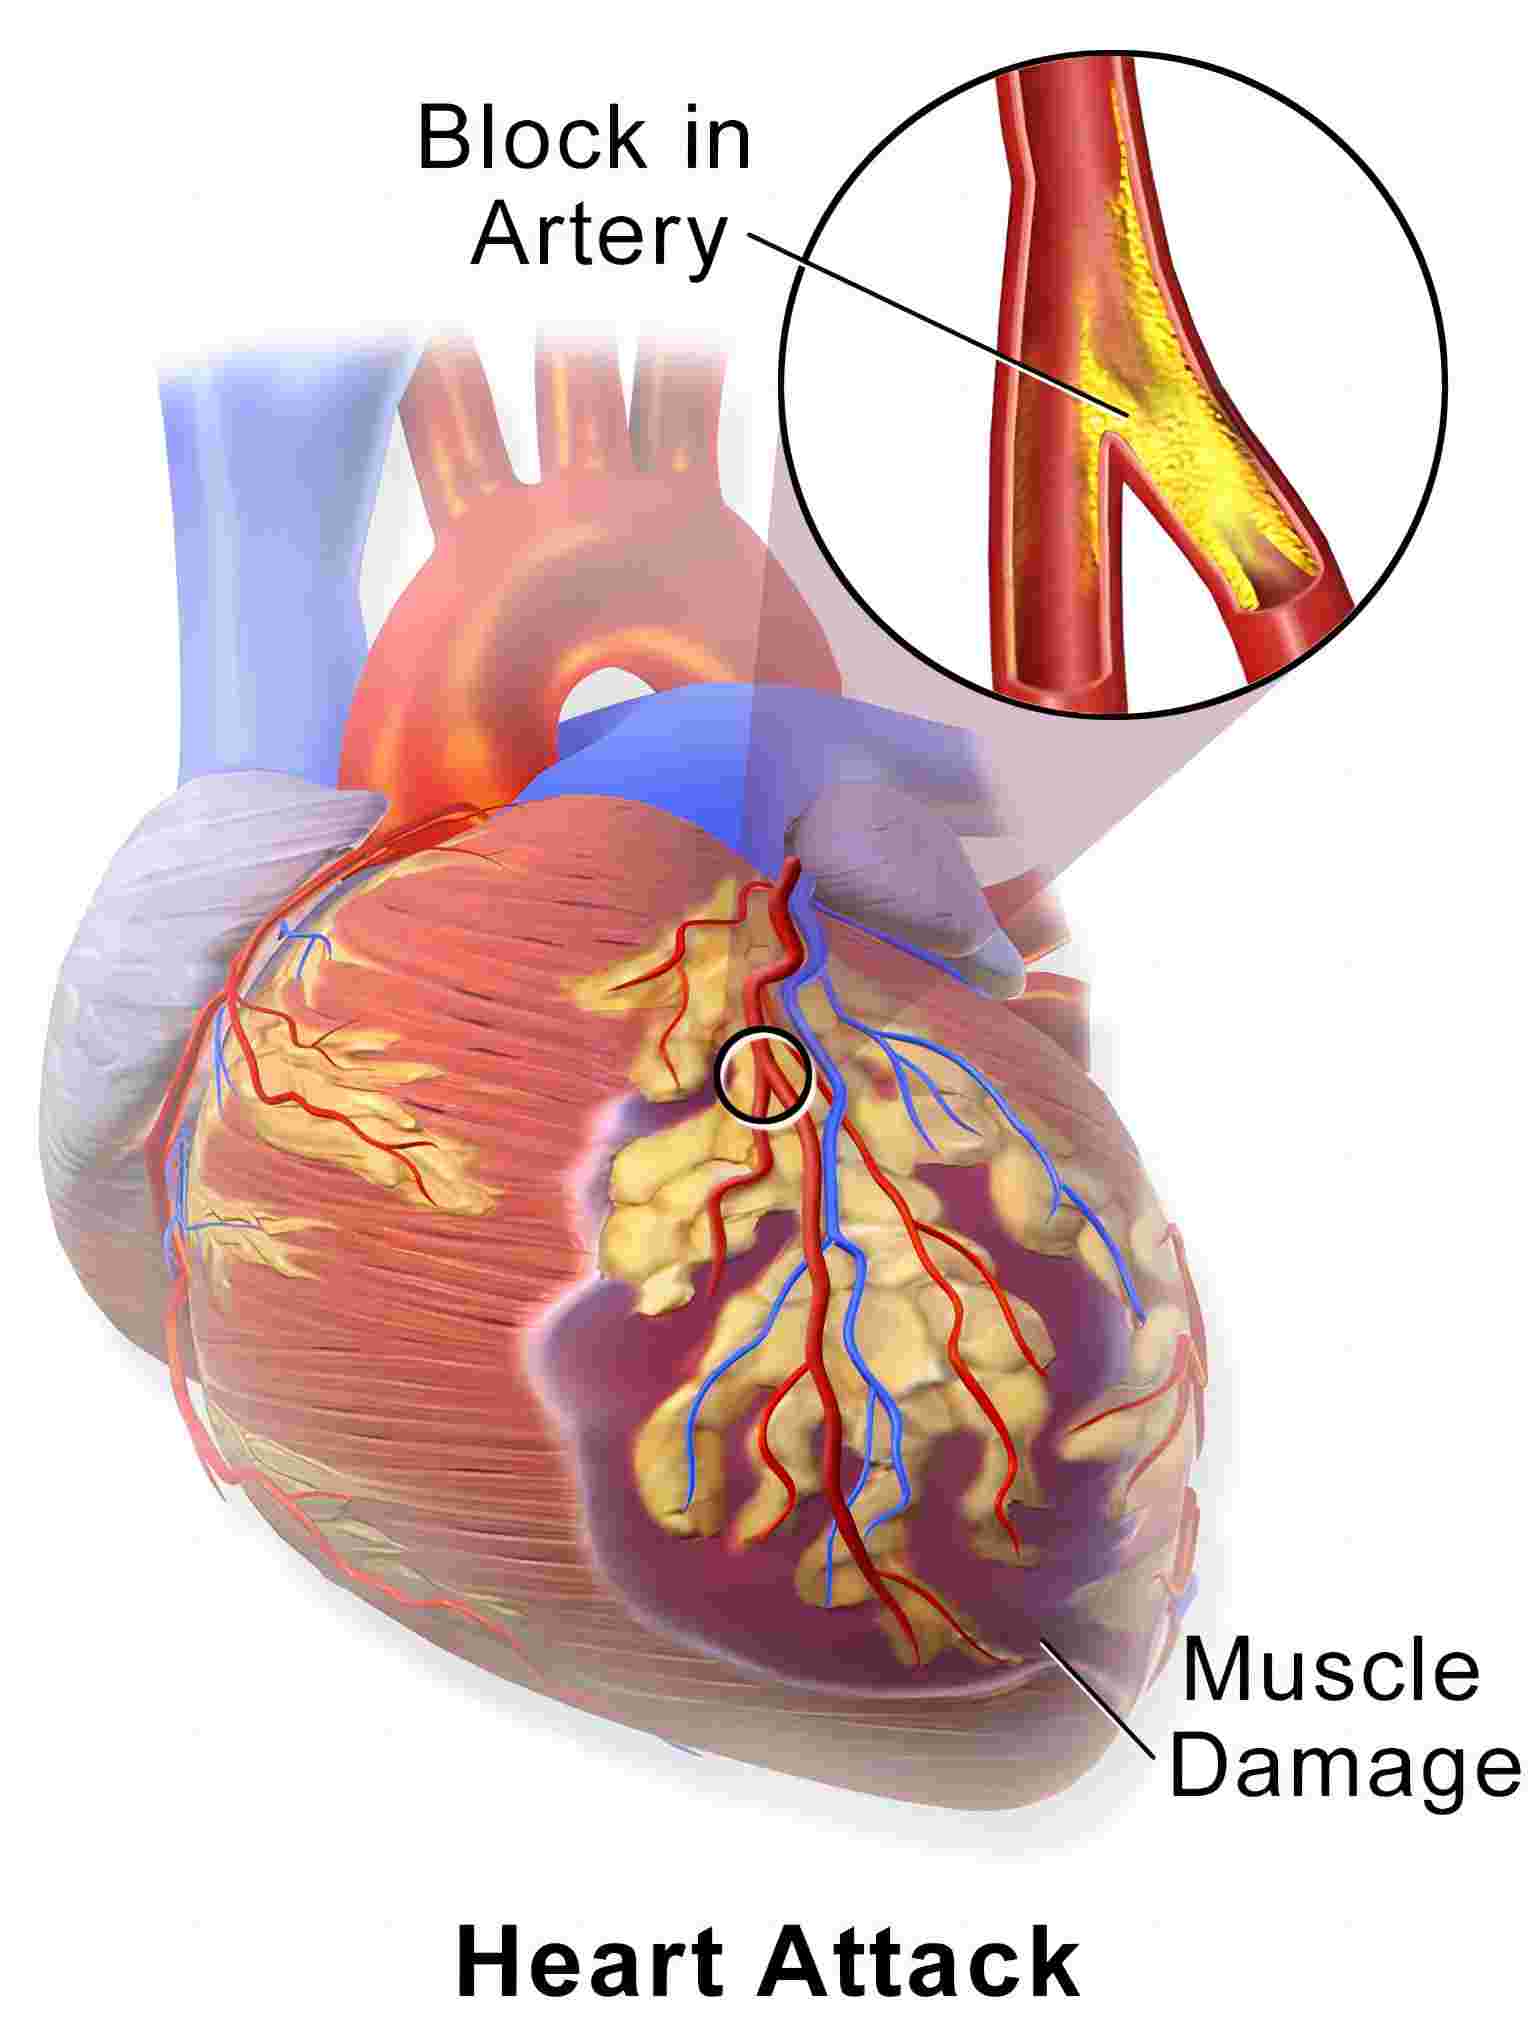 Fig. 1 The schematic diagram of myocardial infarction. （By Blausen Medical Communications, https://commons.wikimedia.org/wiki/File:Blausen_0463_HeartAttack.png)